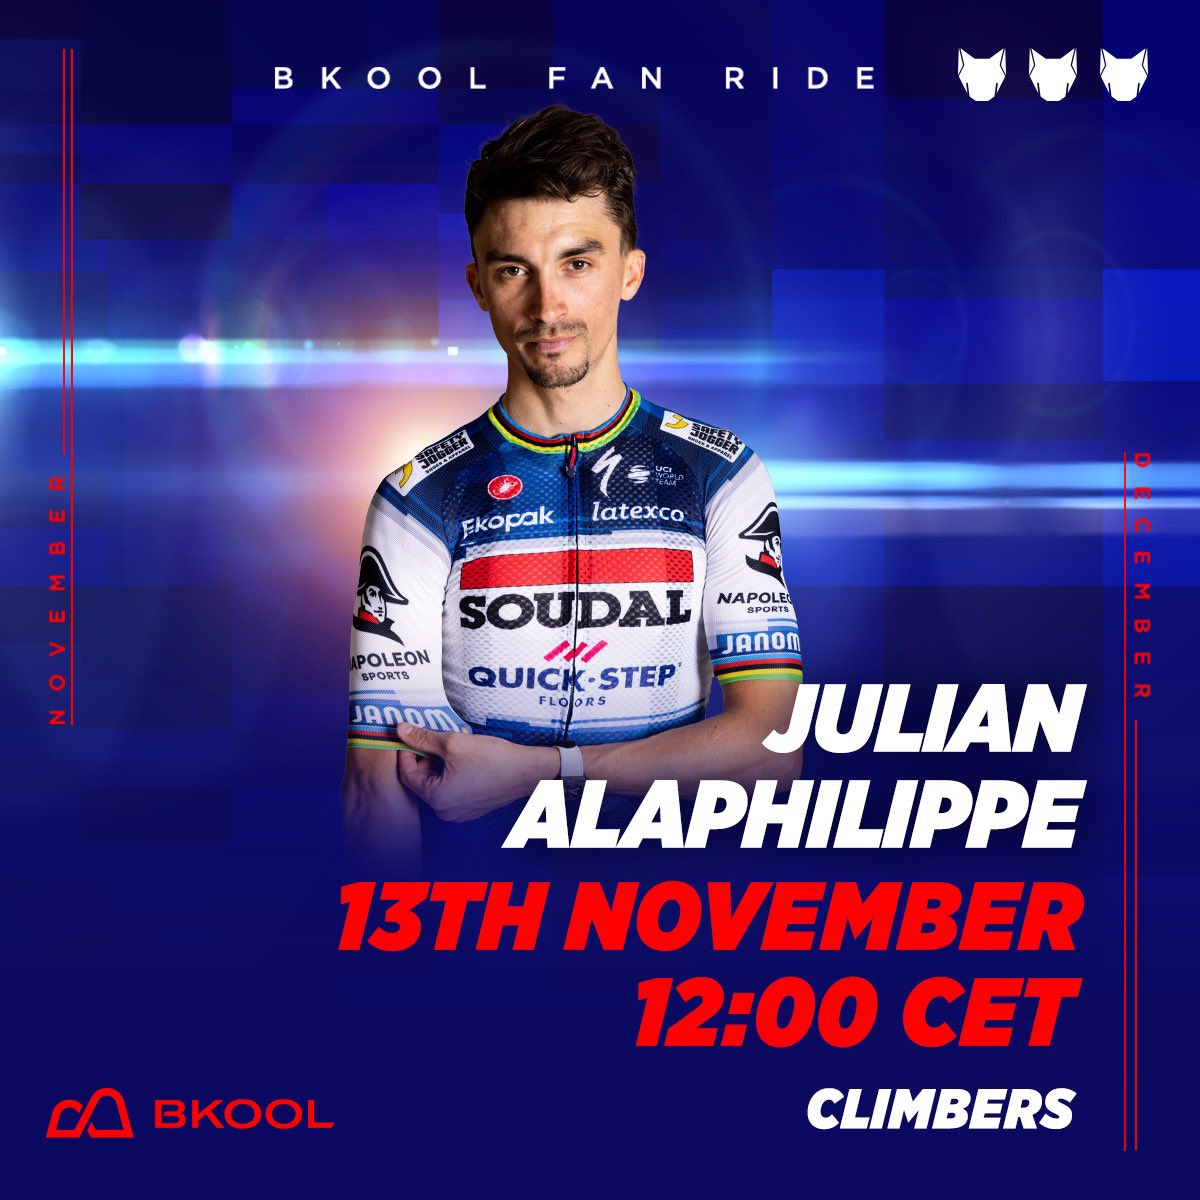 Who else here misses Loulou? 🙋‍♂️ Next Monday brings a chance to ride with @alafpolak1 on @BKOOL_es as part of this off-season’s BKOOL Fan Rides 😃 Just follow this link and as a member of the Wolfpack community you’ll get a special discount: refer.bkool.com/byFpApx